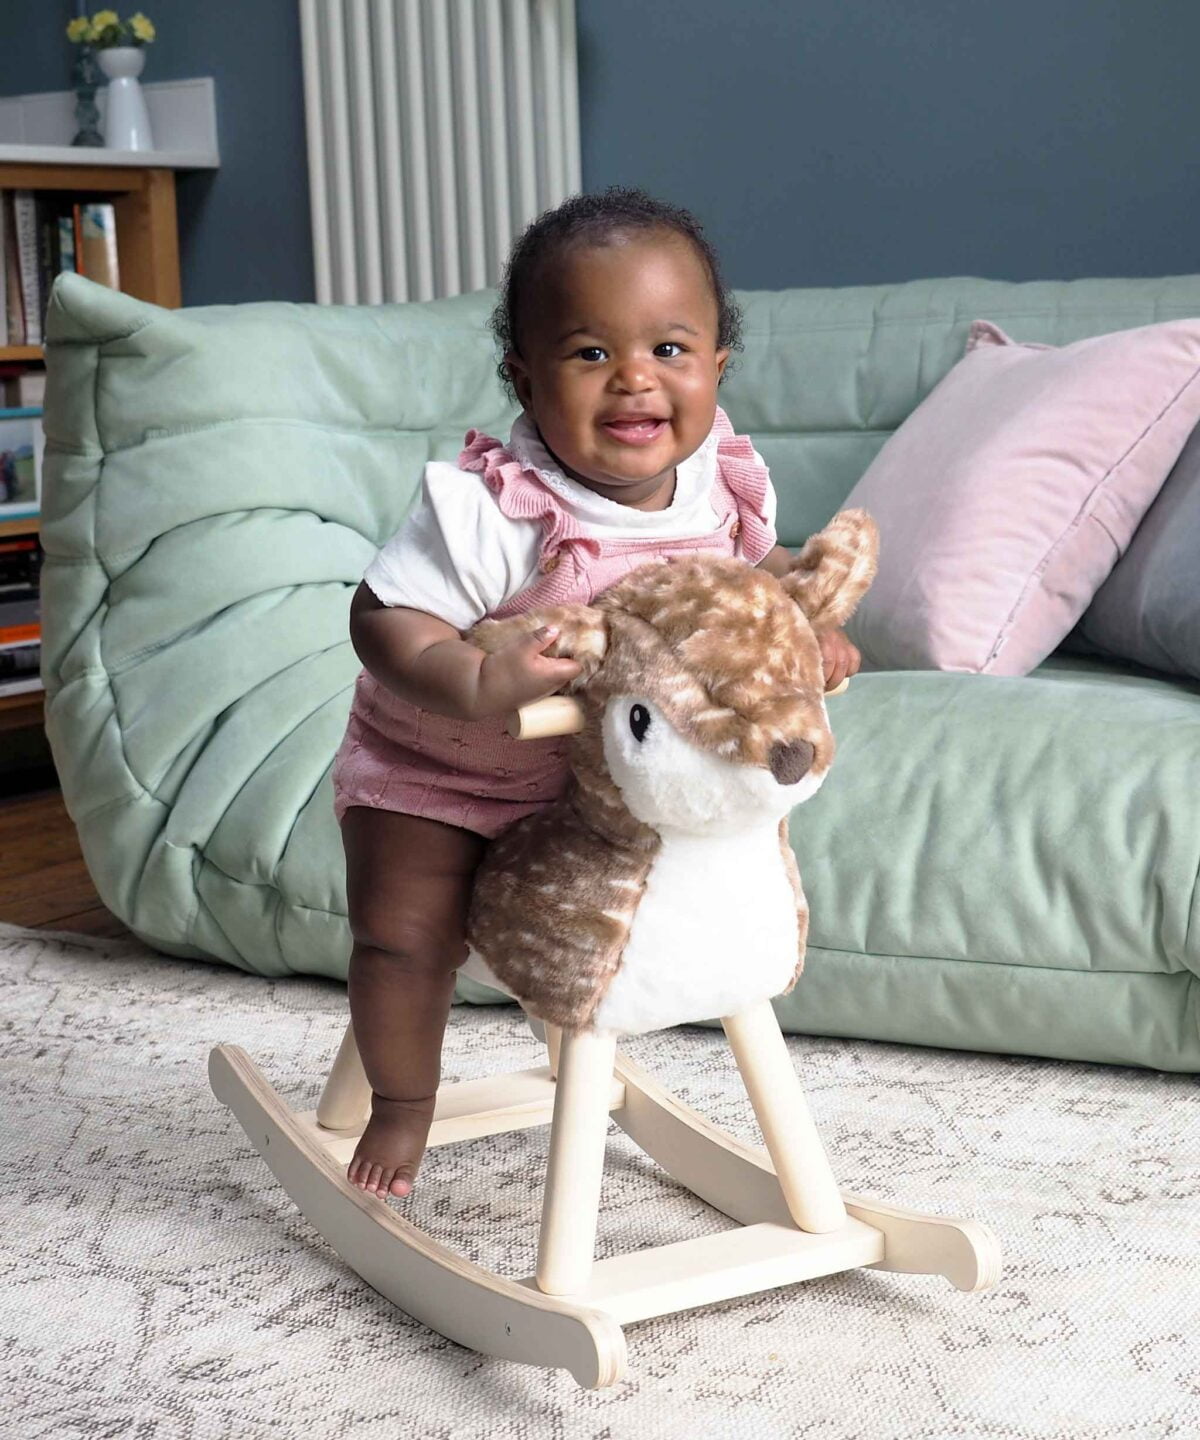 Toddler riding on willow rocking deer toy in front of green sofa